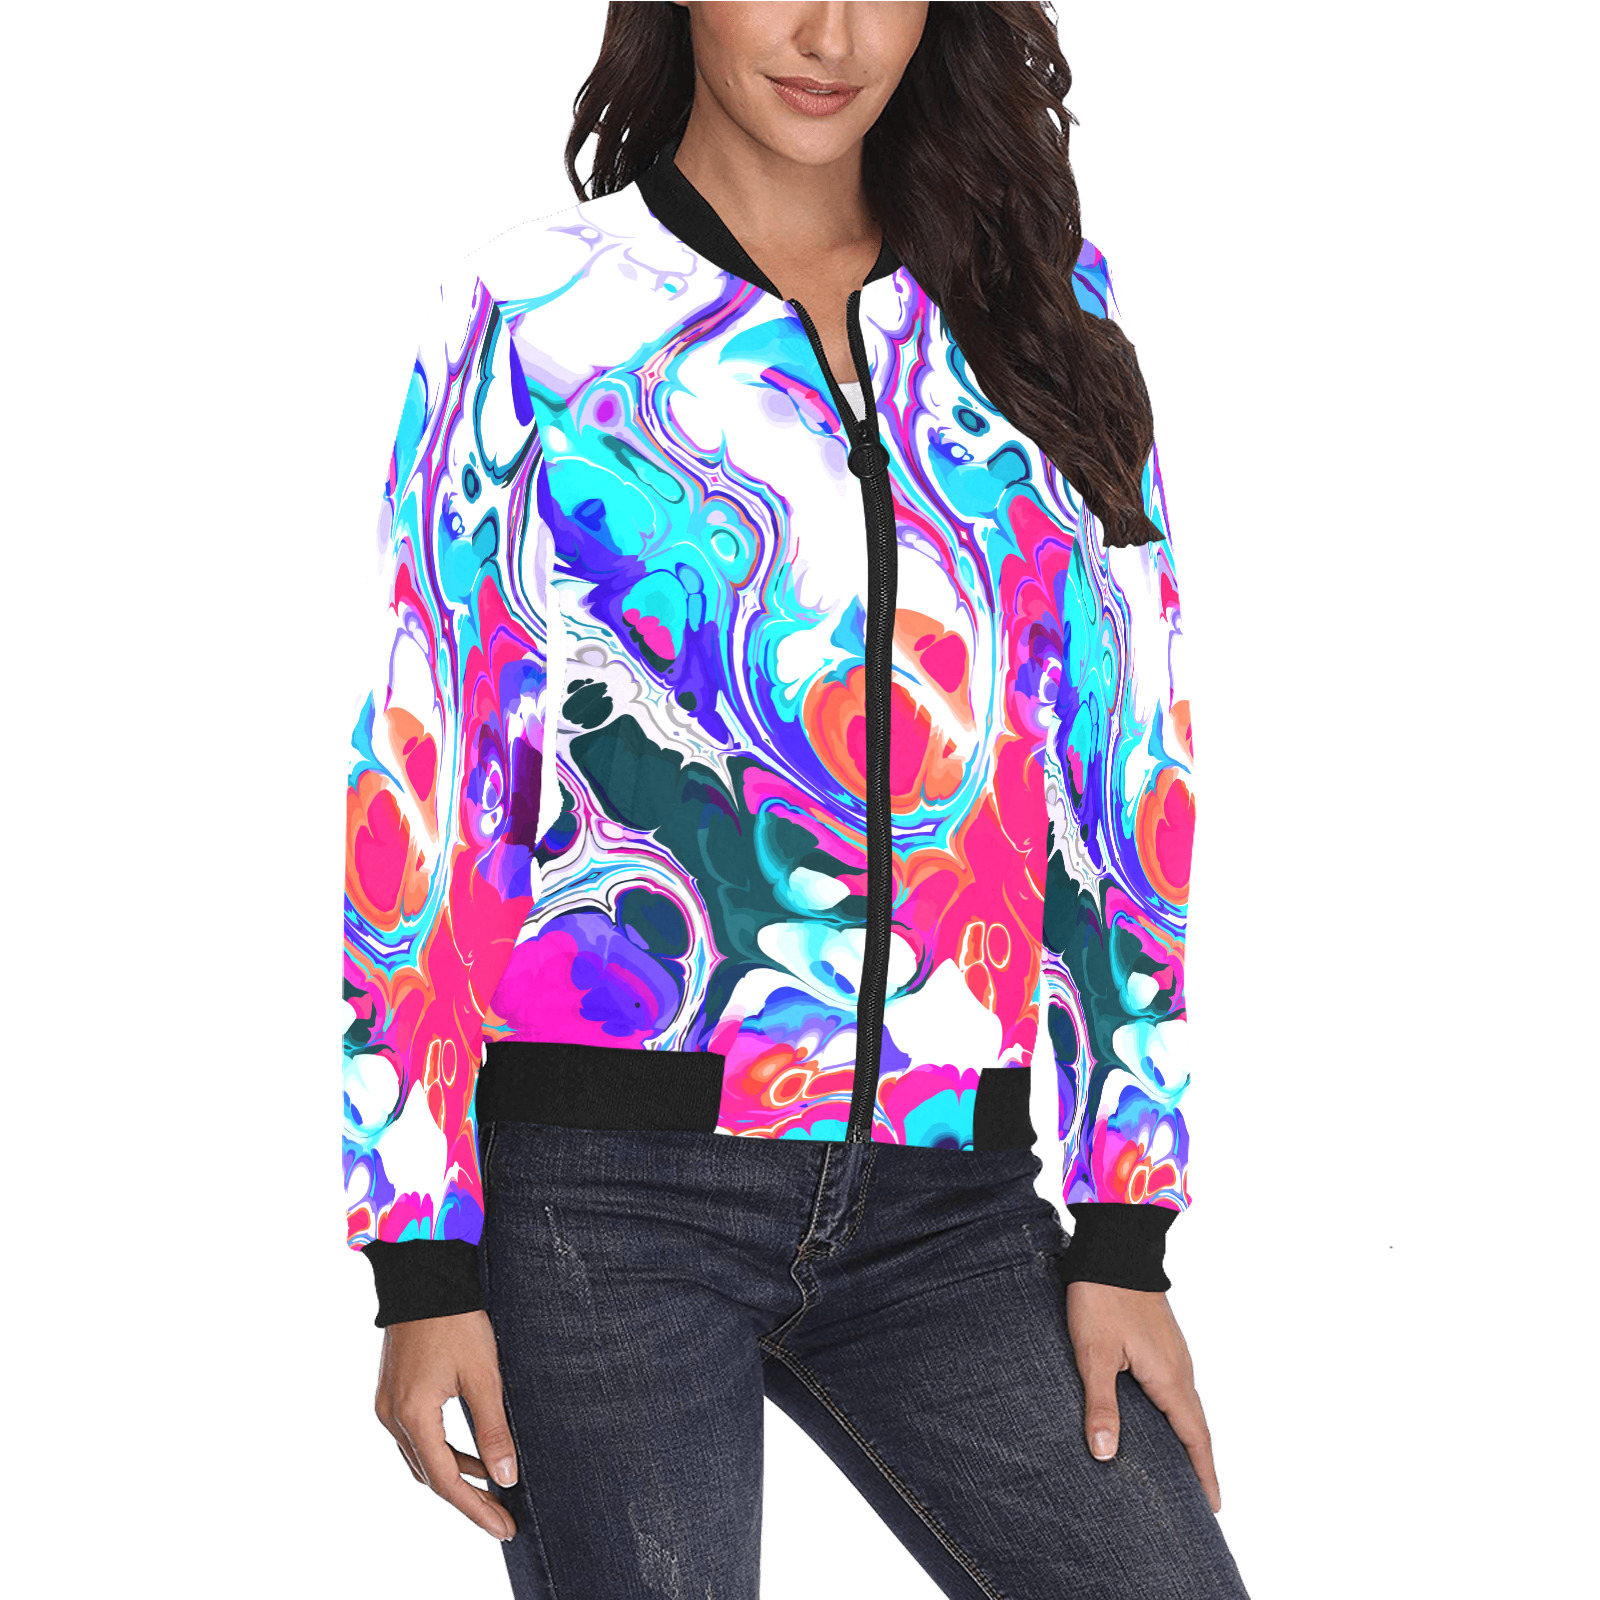 Blue White Pink Liquid Flowing Marbled Ink Abstract All Over Print Bomber Jacket for Women (Model H36)